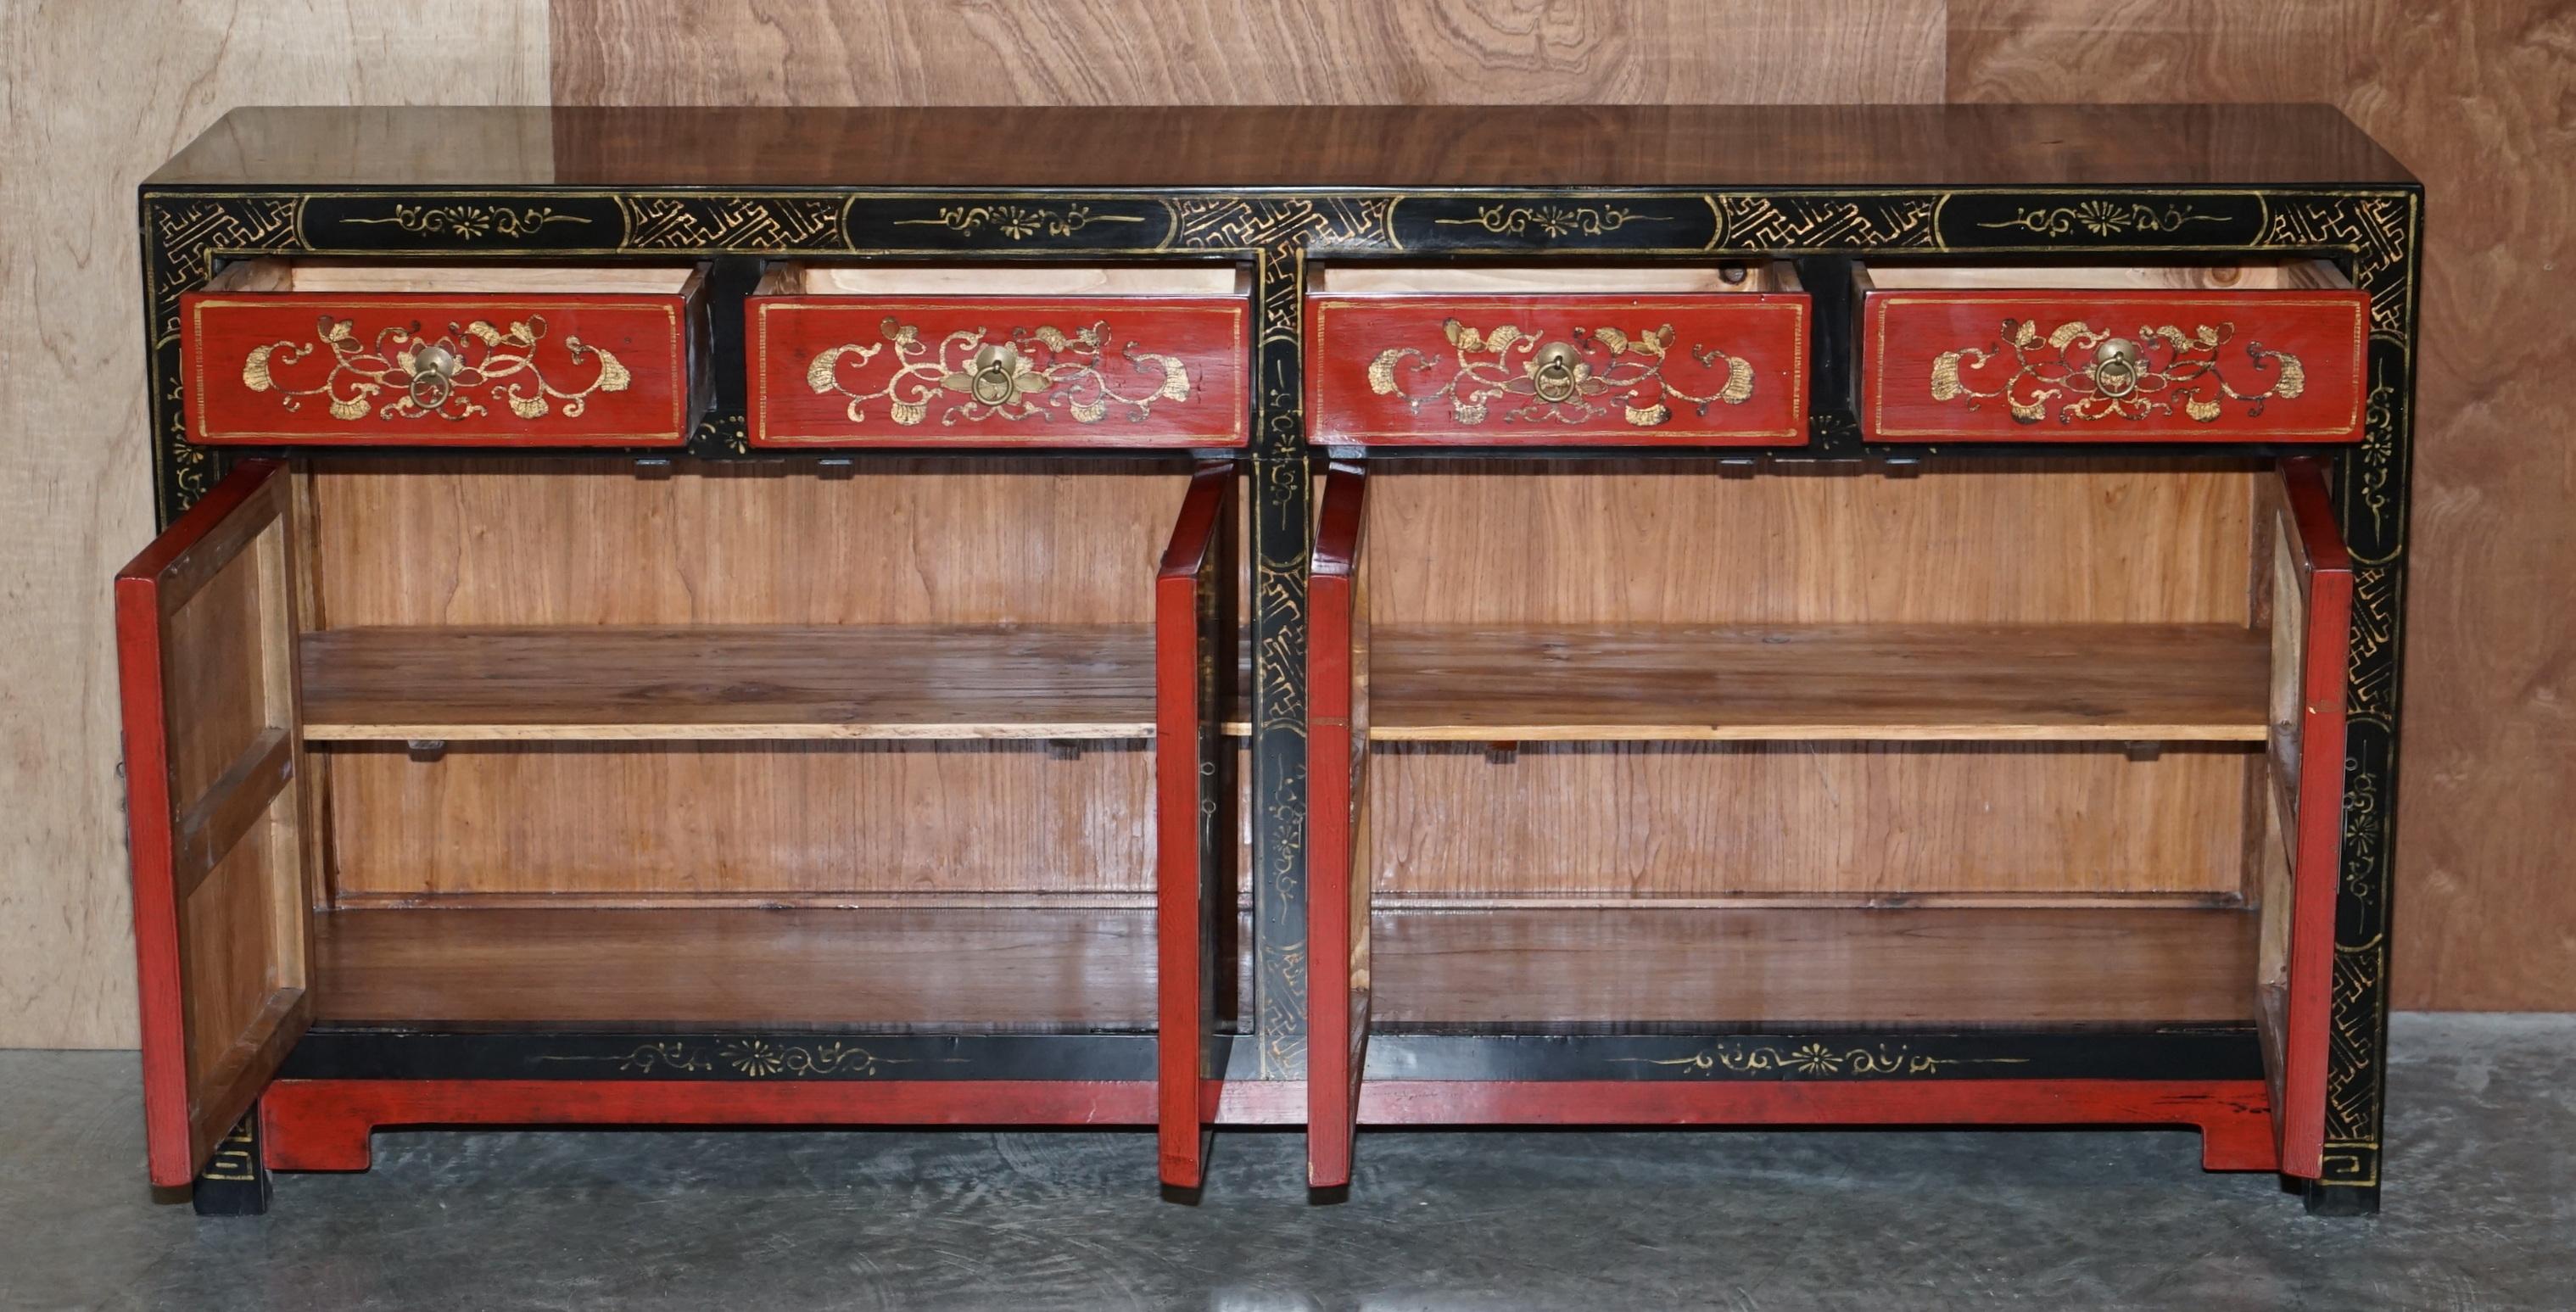 Exquisite Quality Oriental Vintage Hand Painted & Lacquered Sideboard Drawers 8